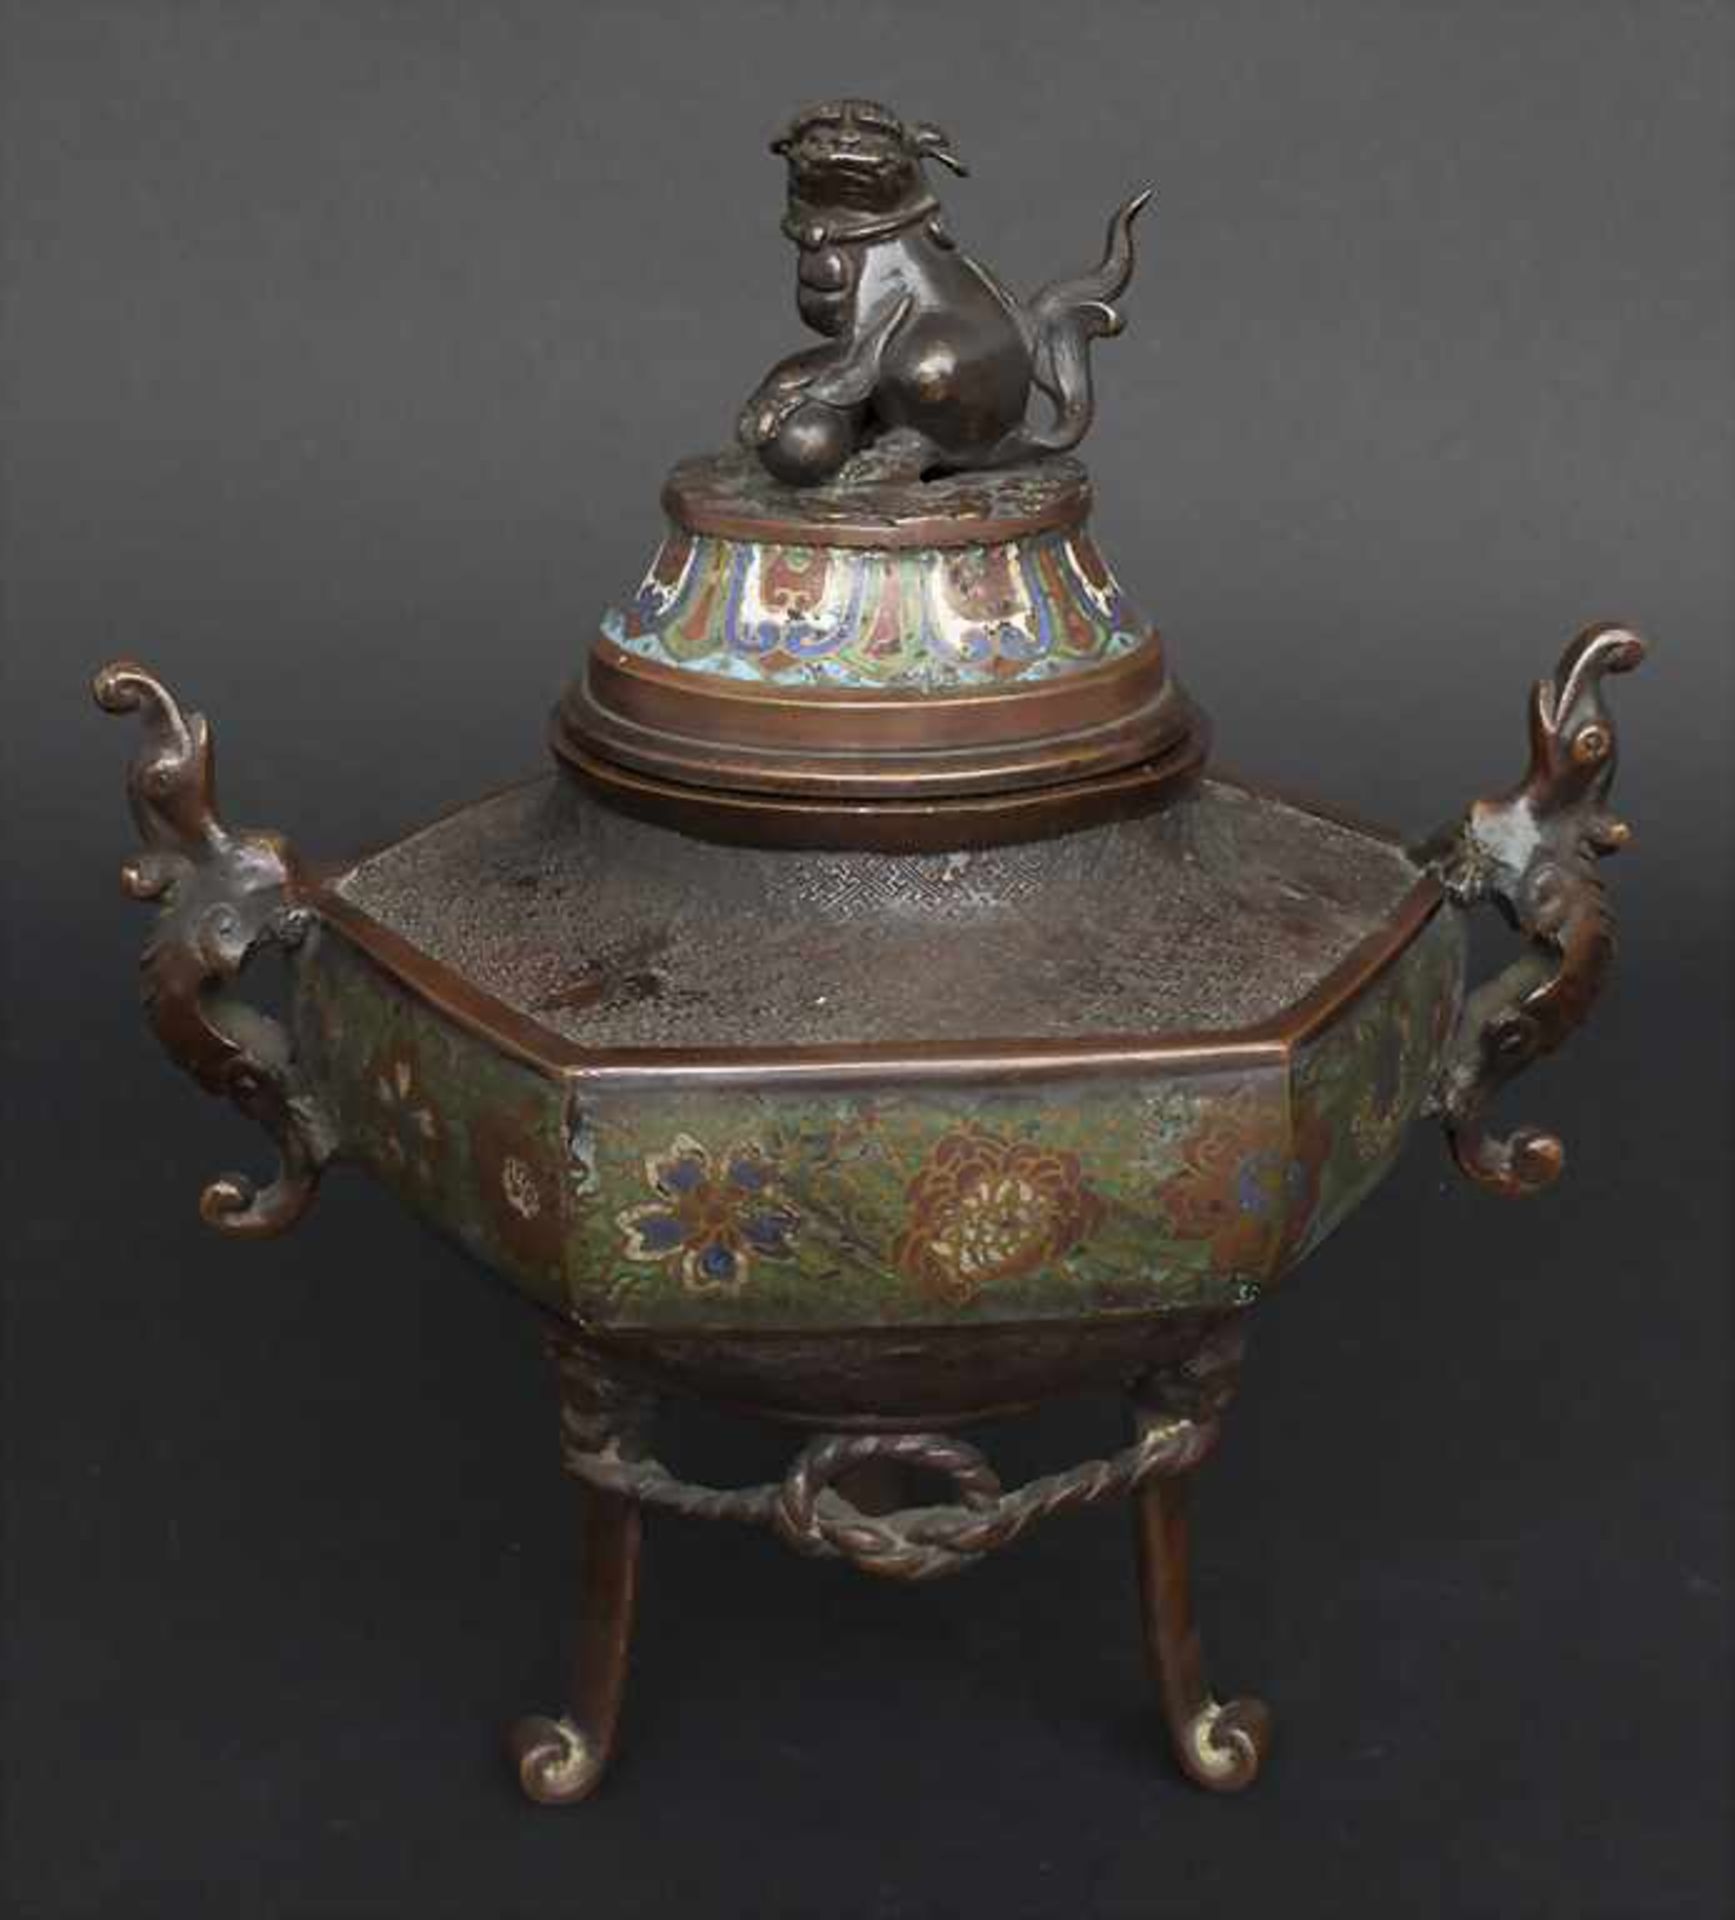 Cloisonné Weihrauchbrenner mit Shishi / A Cloisonné incense burner with Shishi, China, 19. Jh. - Image 5 of 8